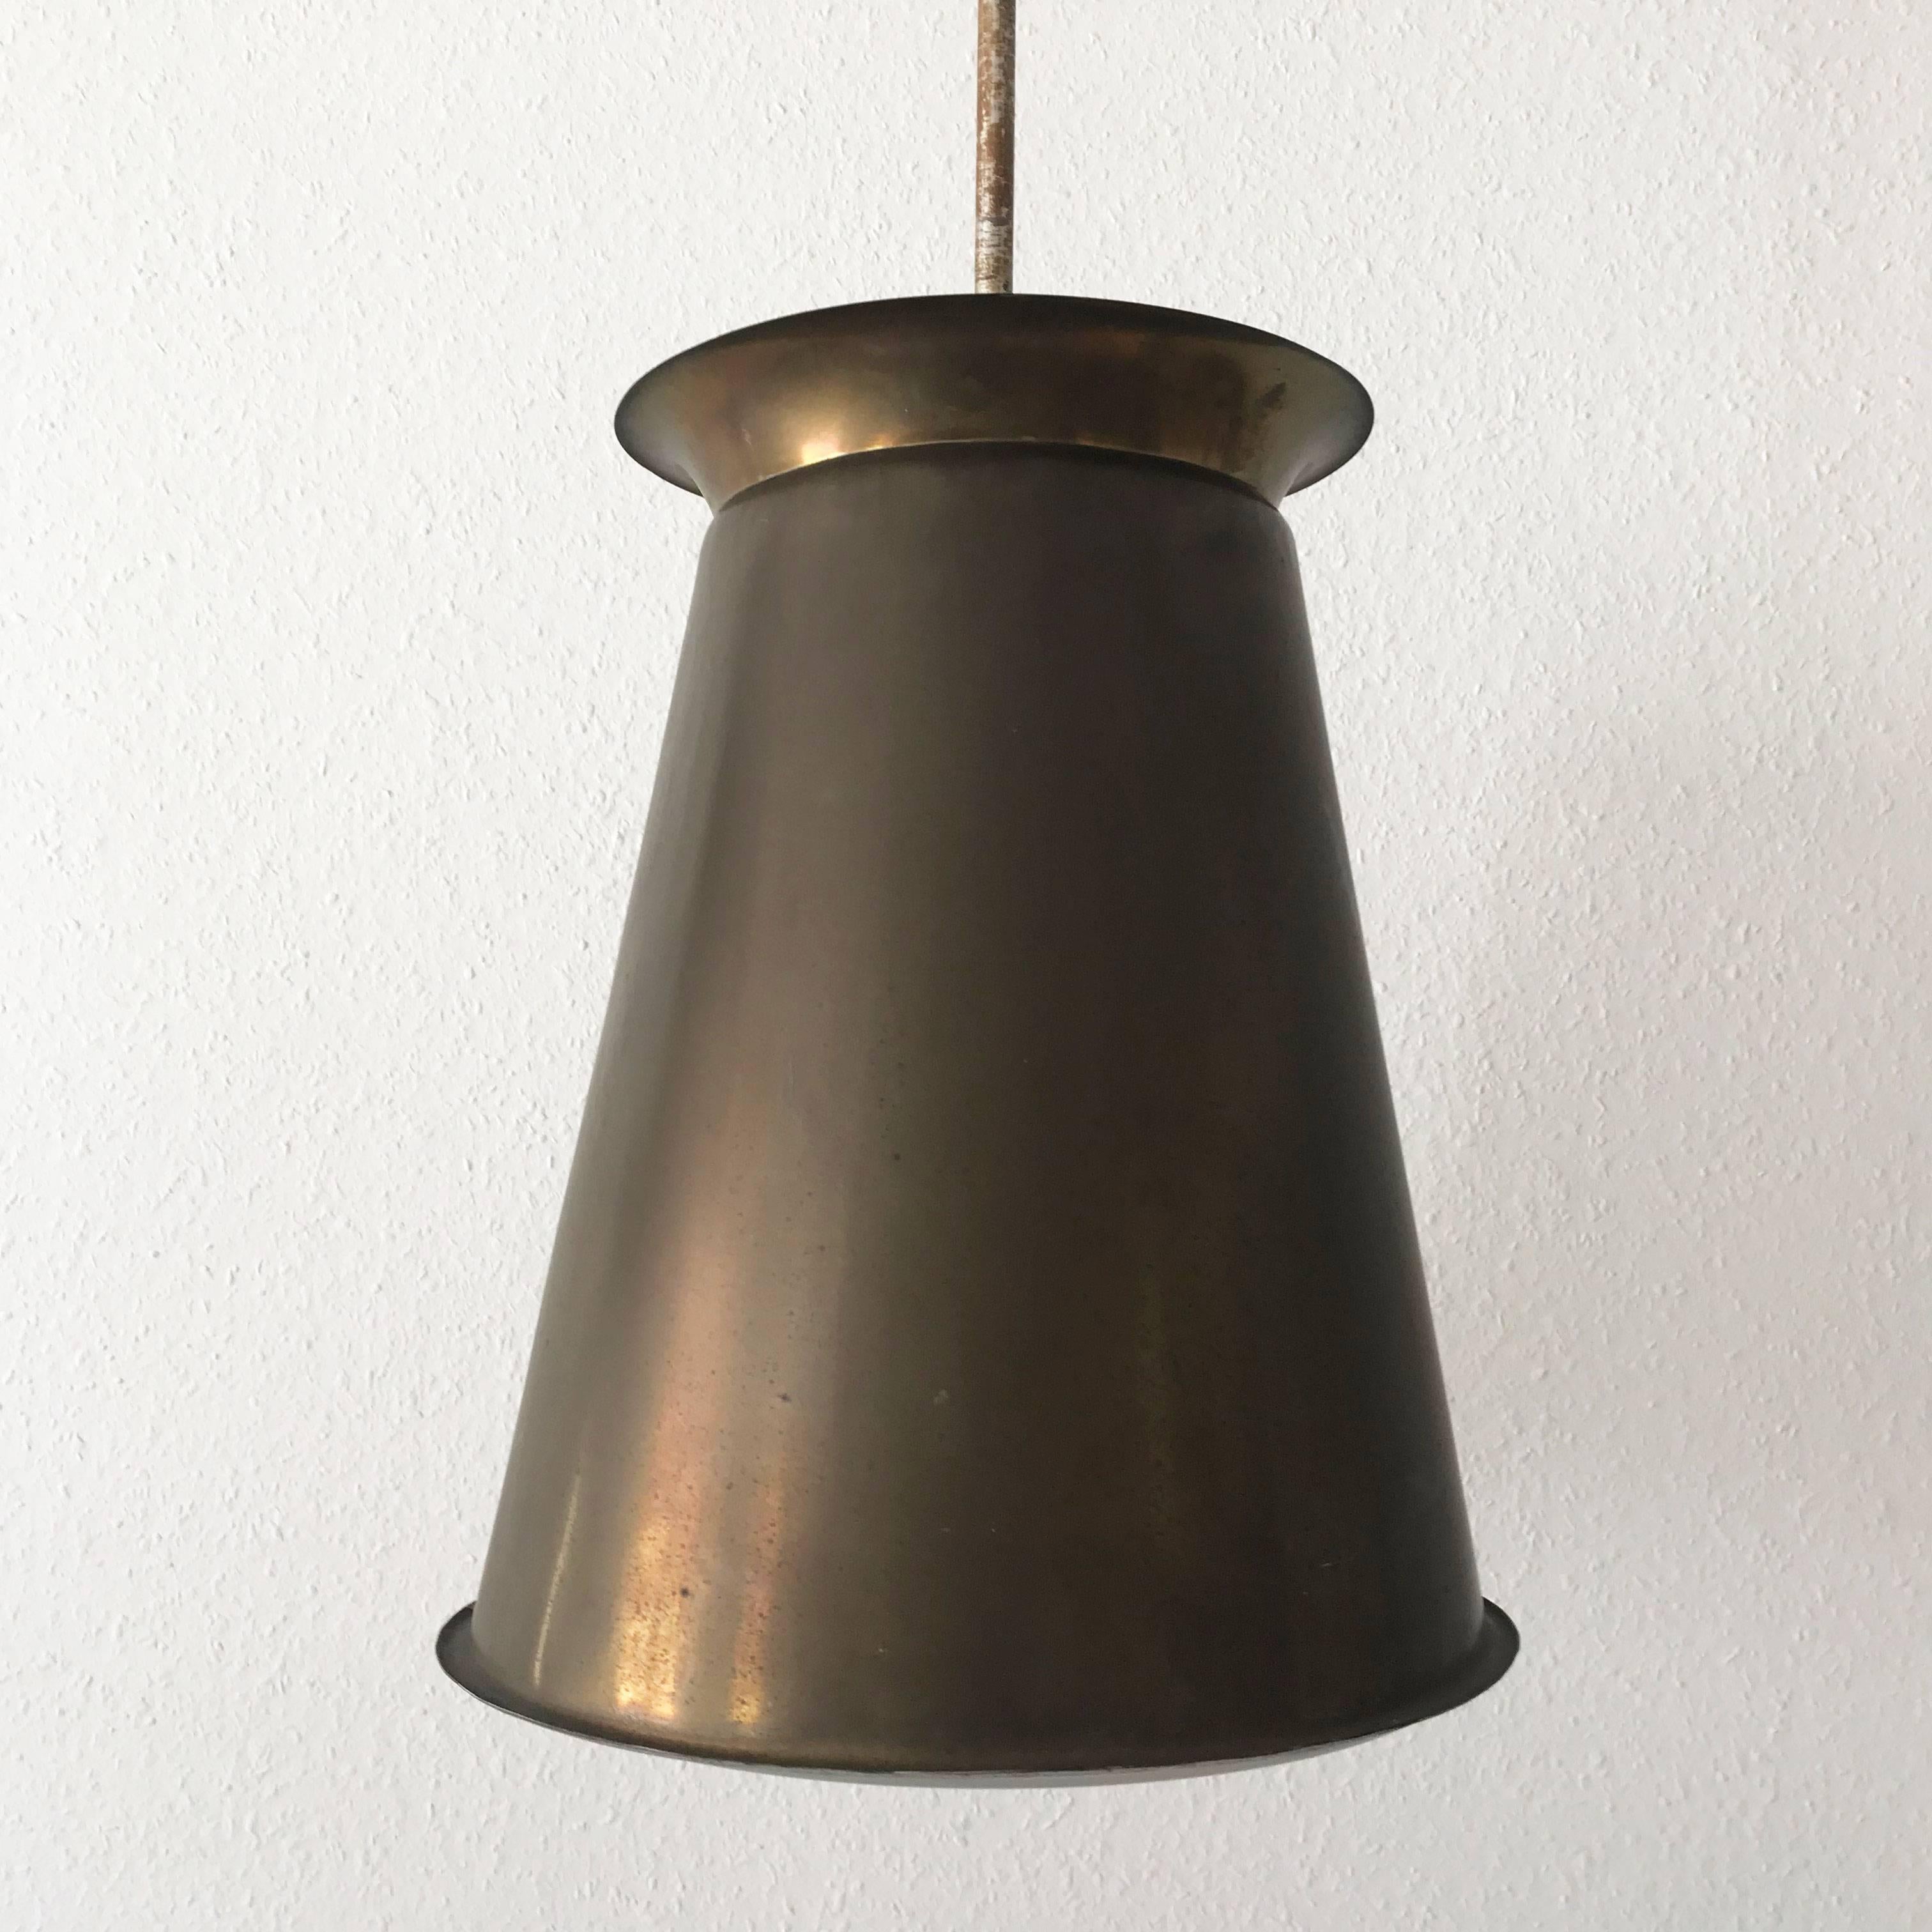 Exceptional Bauhaus Pendant Lamp by Adolf Meyer for Zeiss Ikon, 1930s, Germany In Good Condition For Sale In Munich, DE